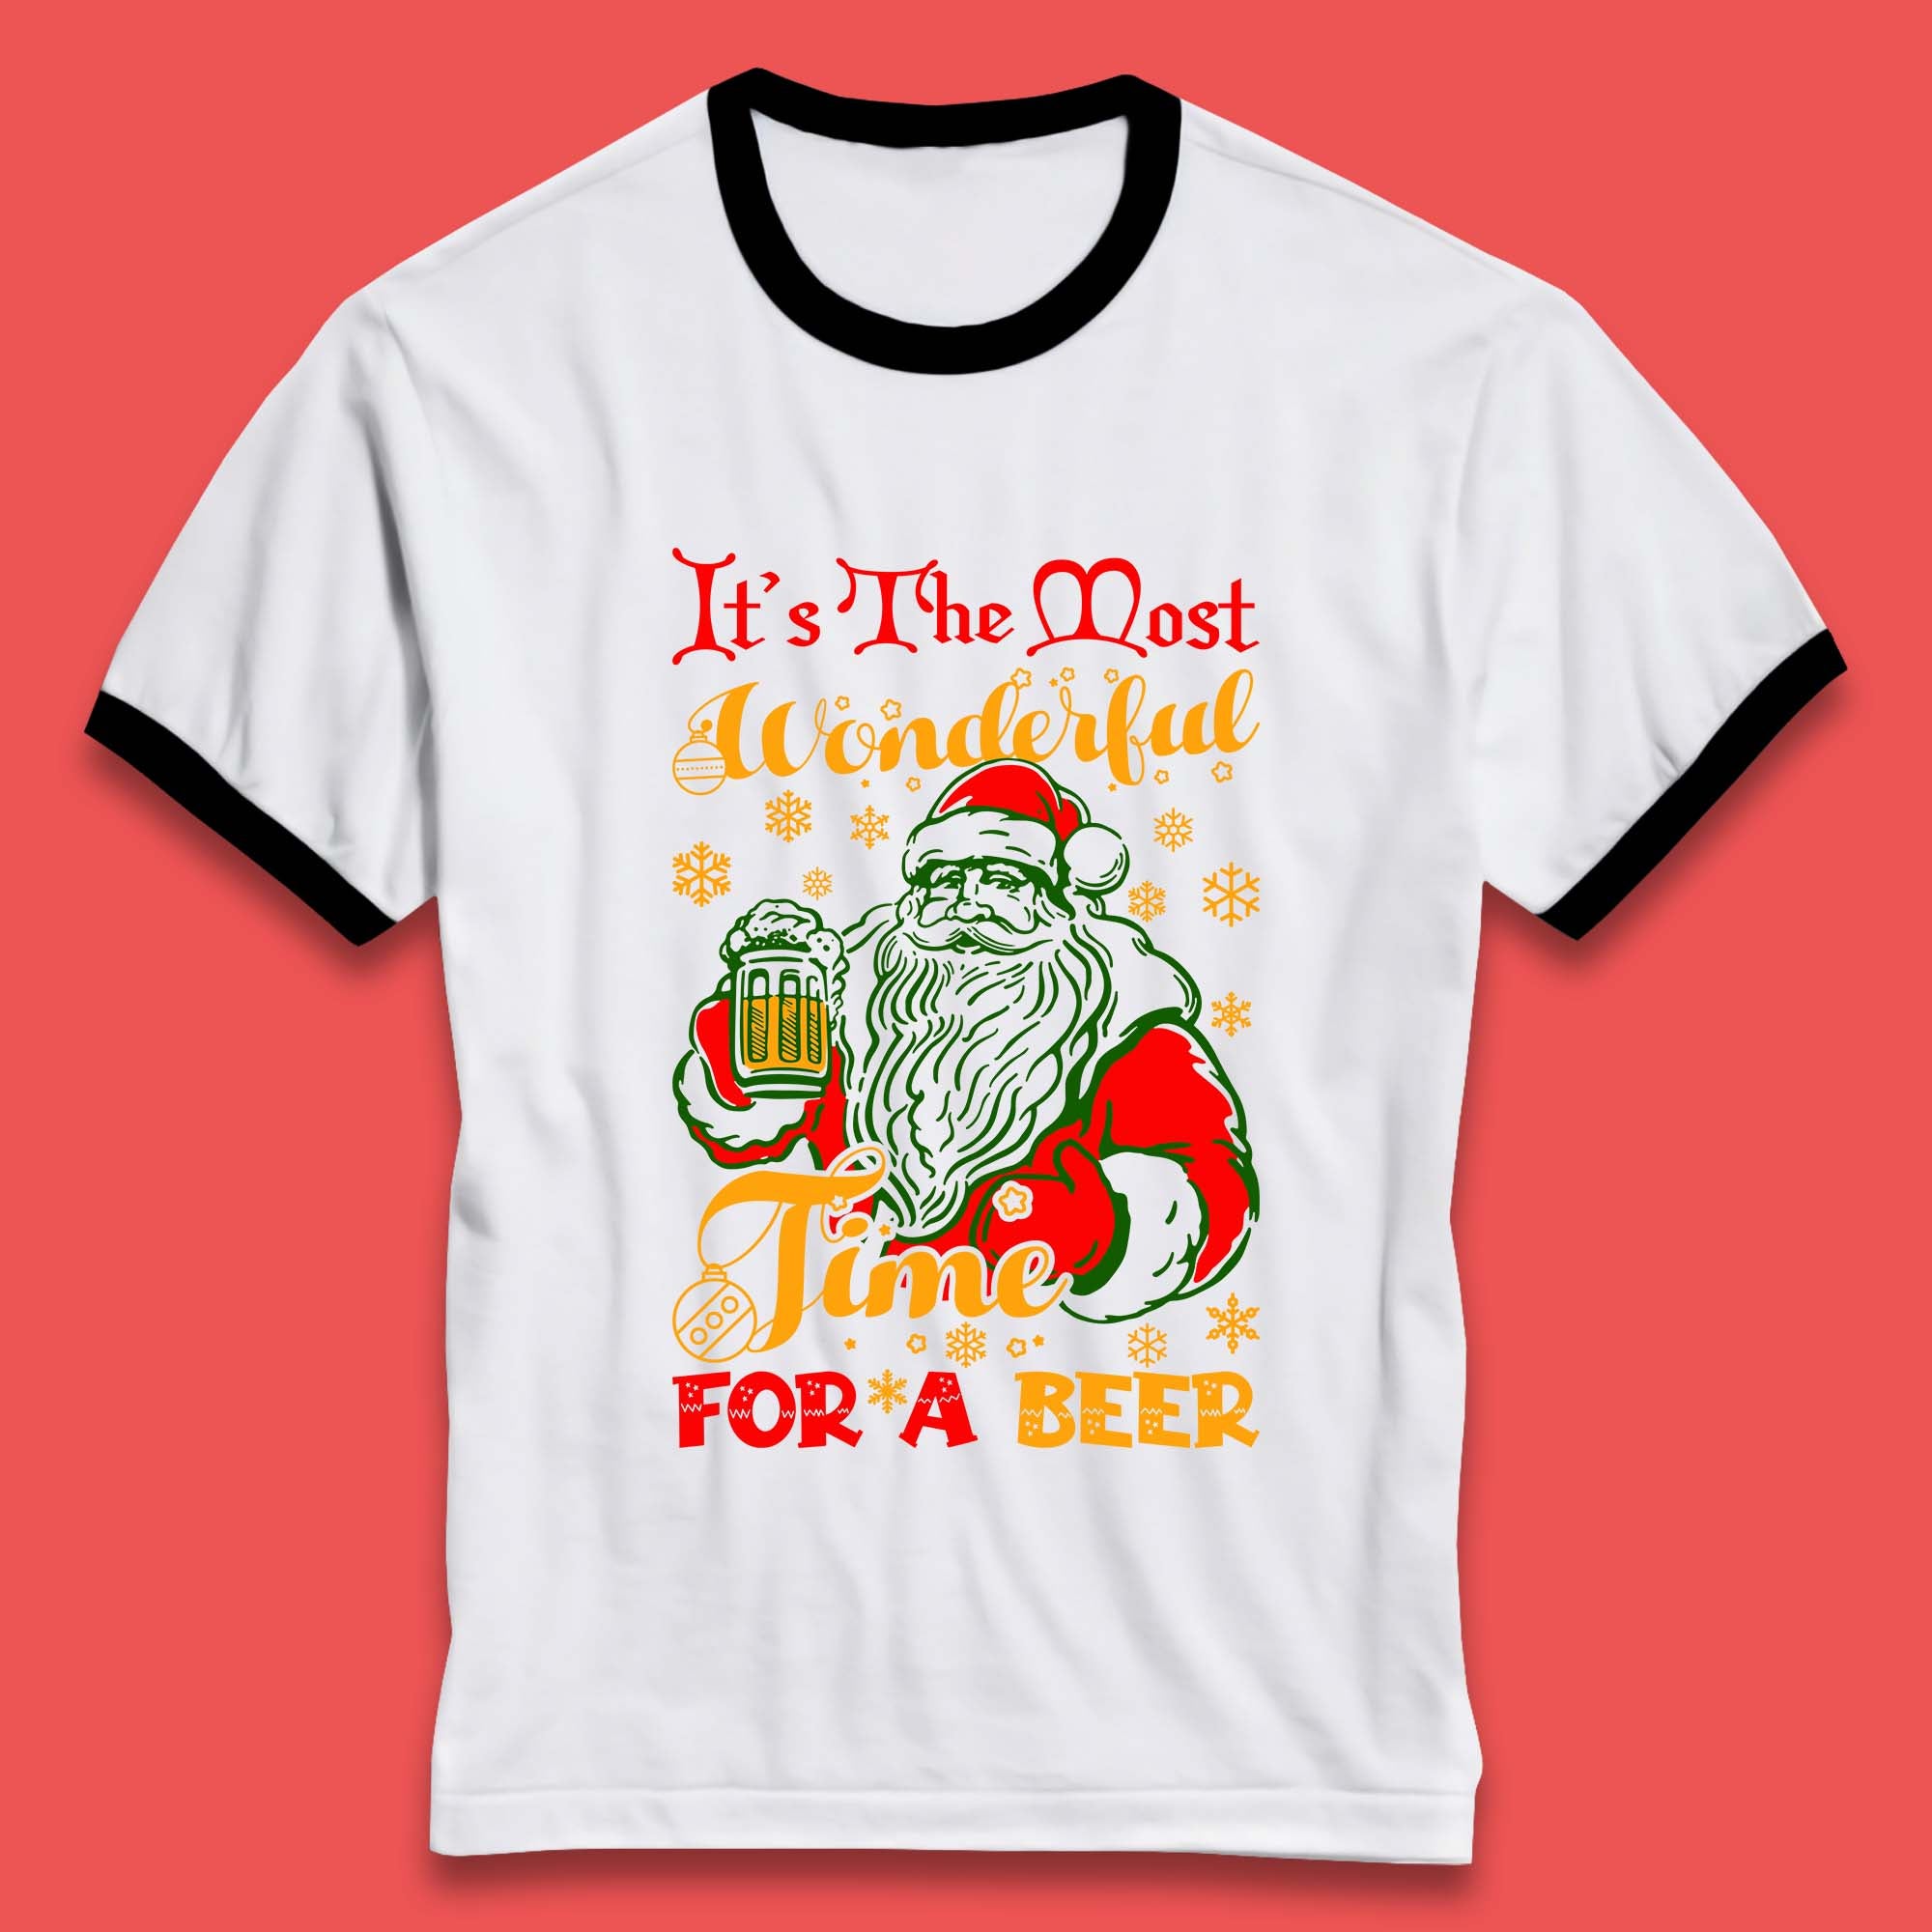 It's The Most Wonderful Time For A Beer Christmas Drinking Party Santa Claus Drink Beer Xmas Ringer T Shirt